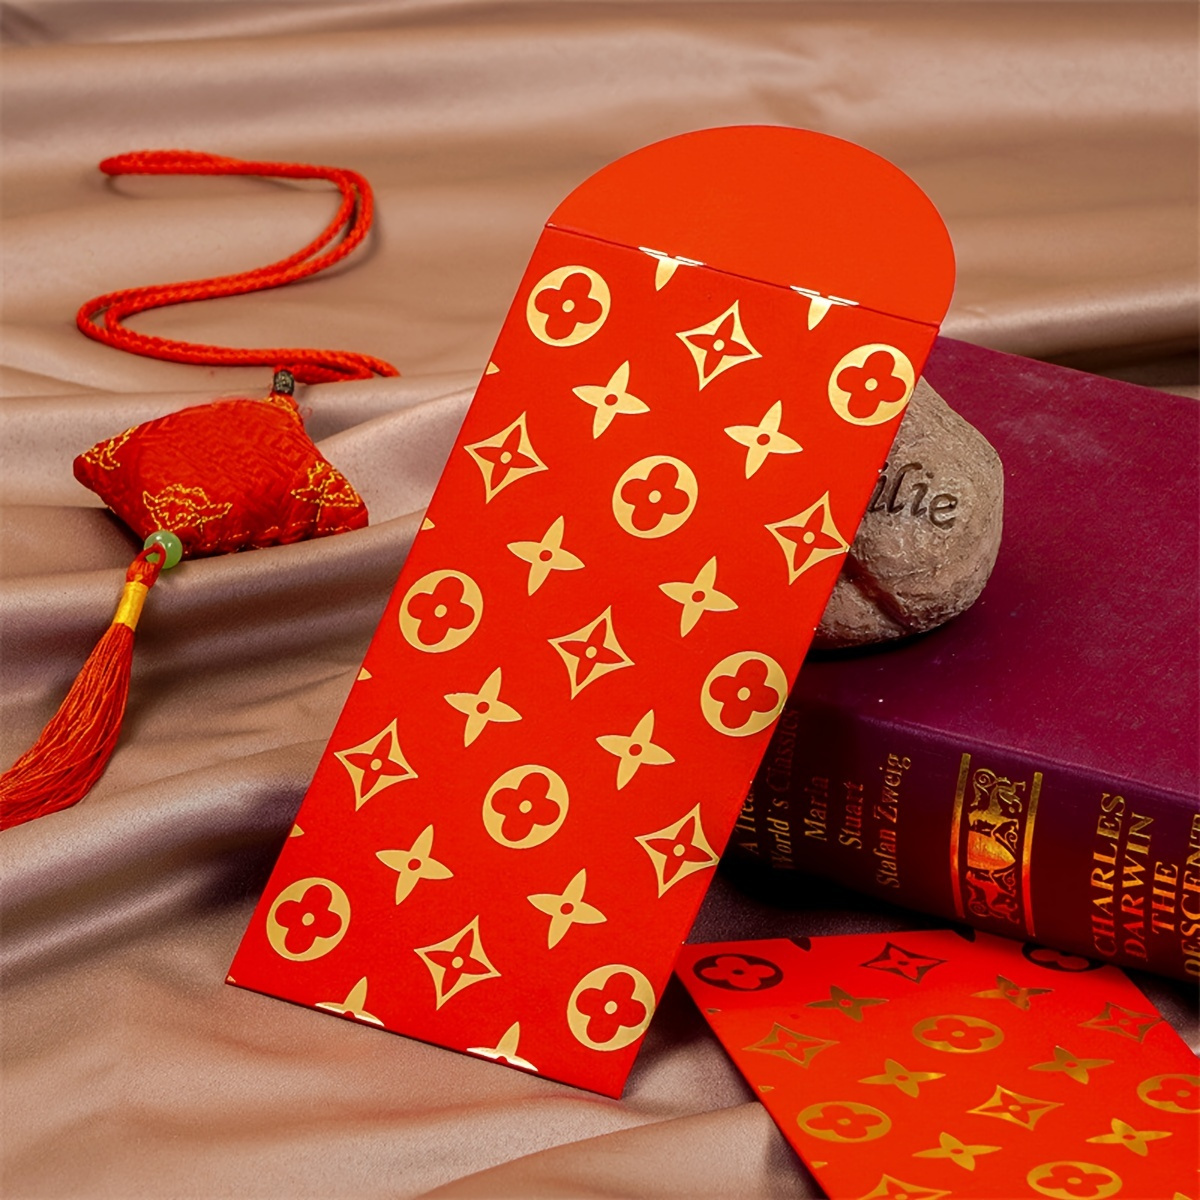 Louis Vuitton Chinese New Year Collection